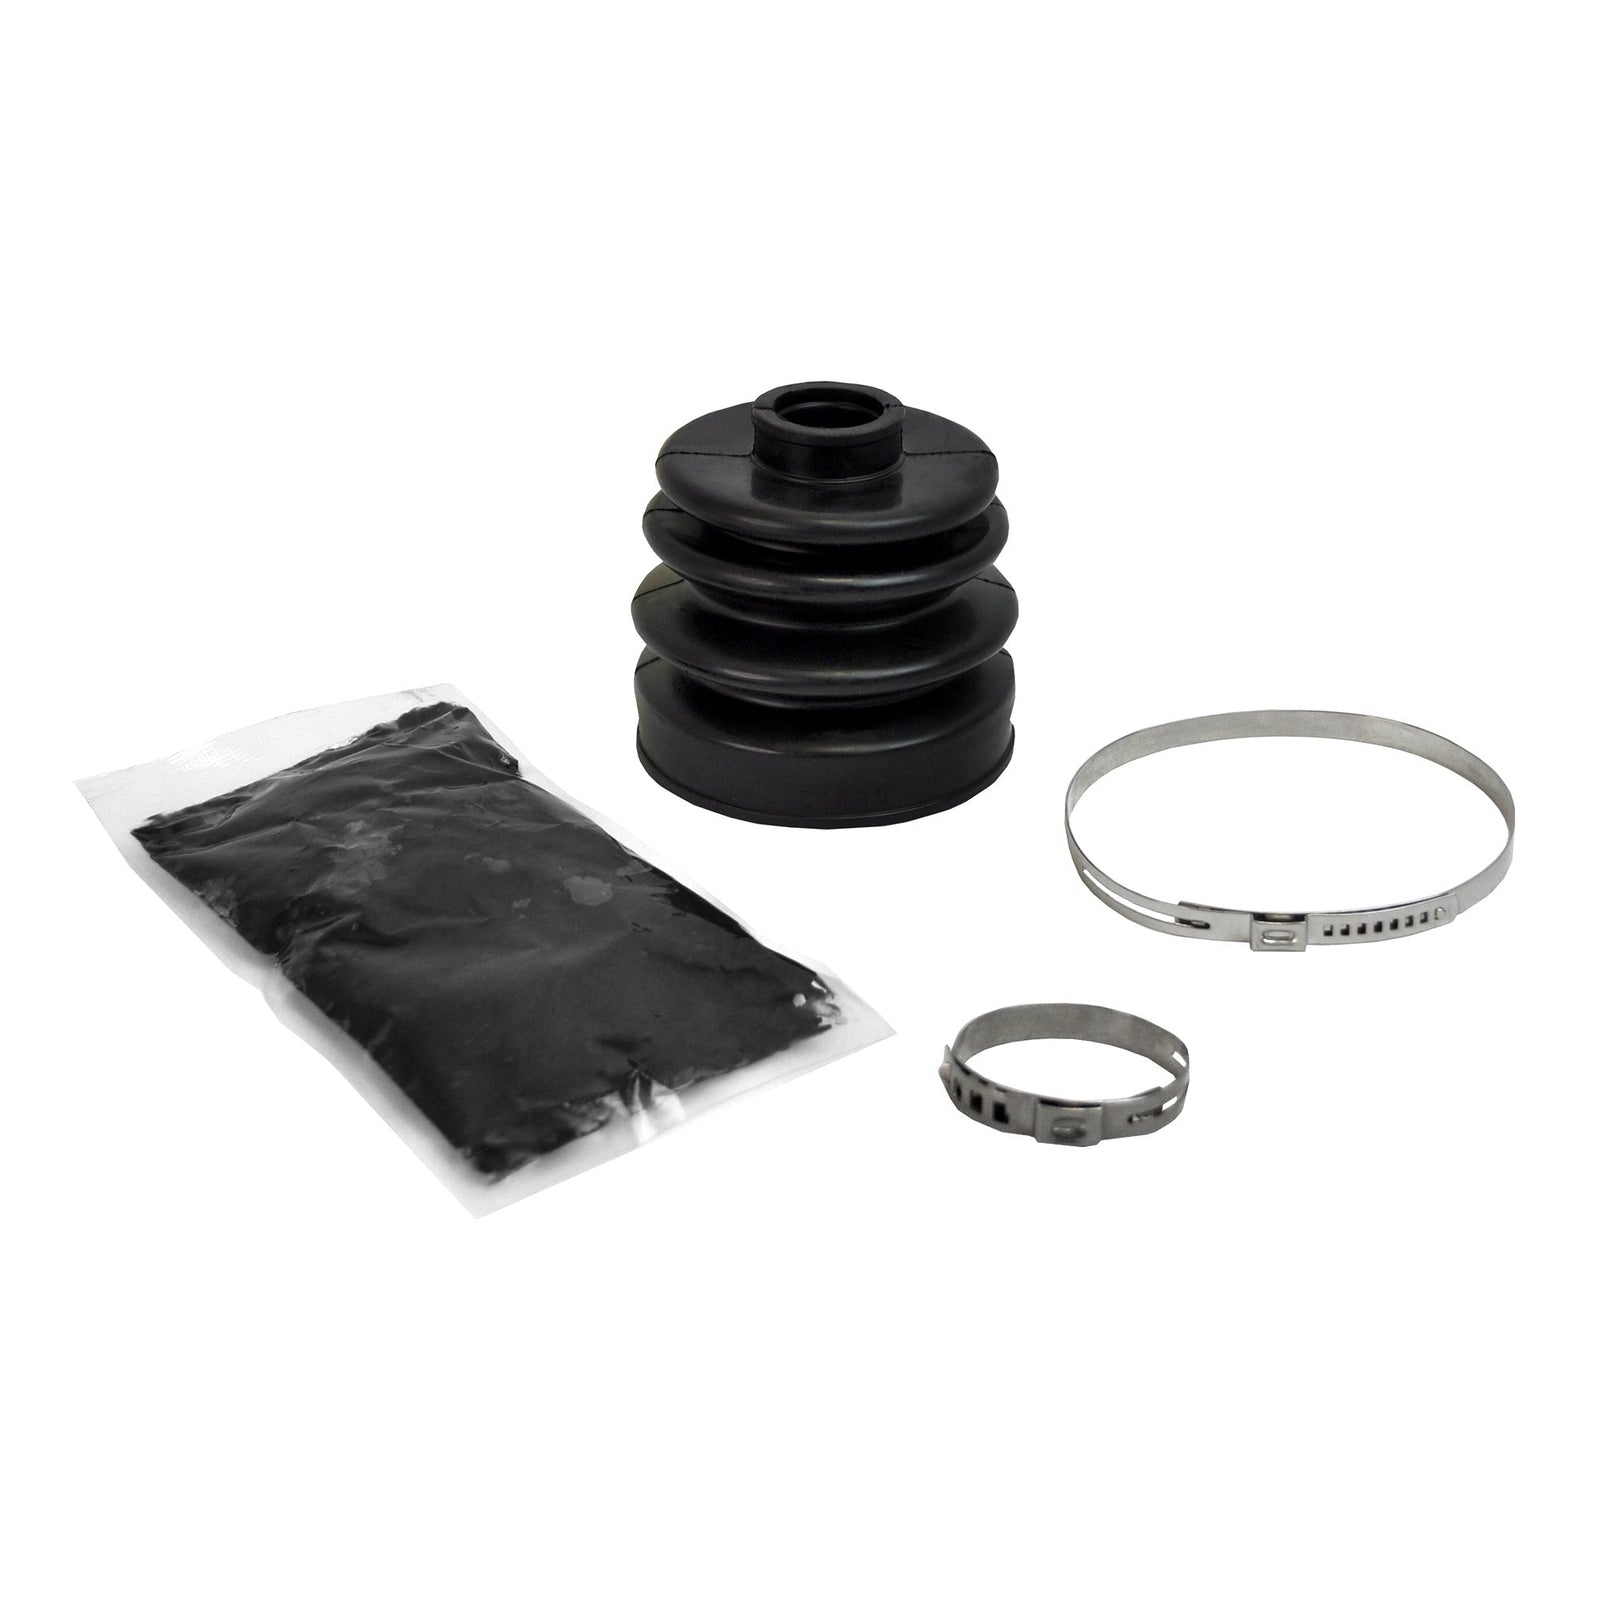 Arctic Cat TRV 700 Rugged OE Replacement Boot Kit